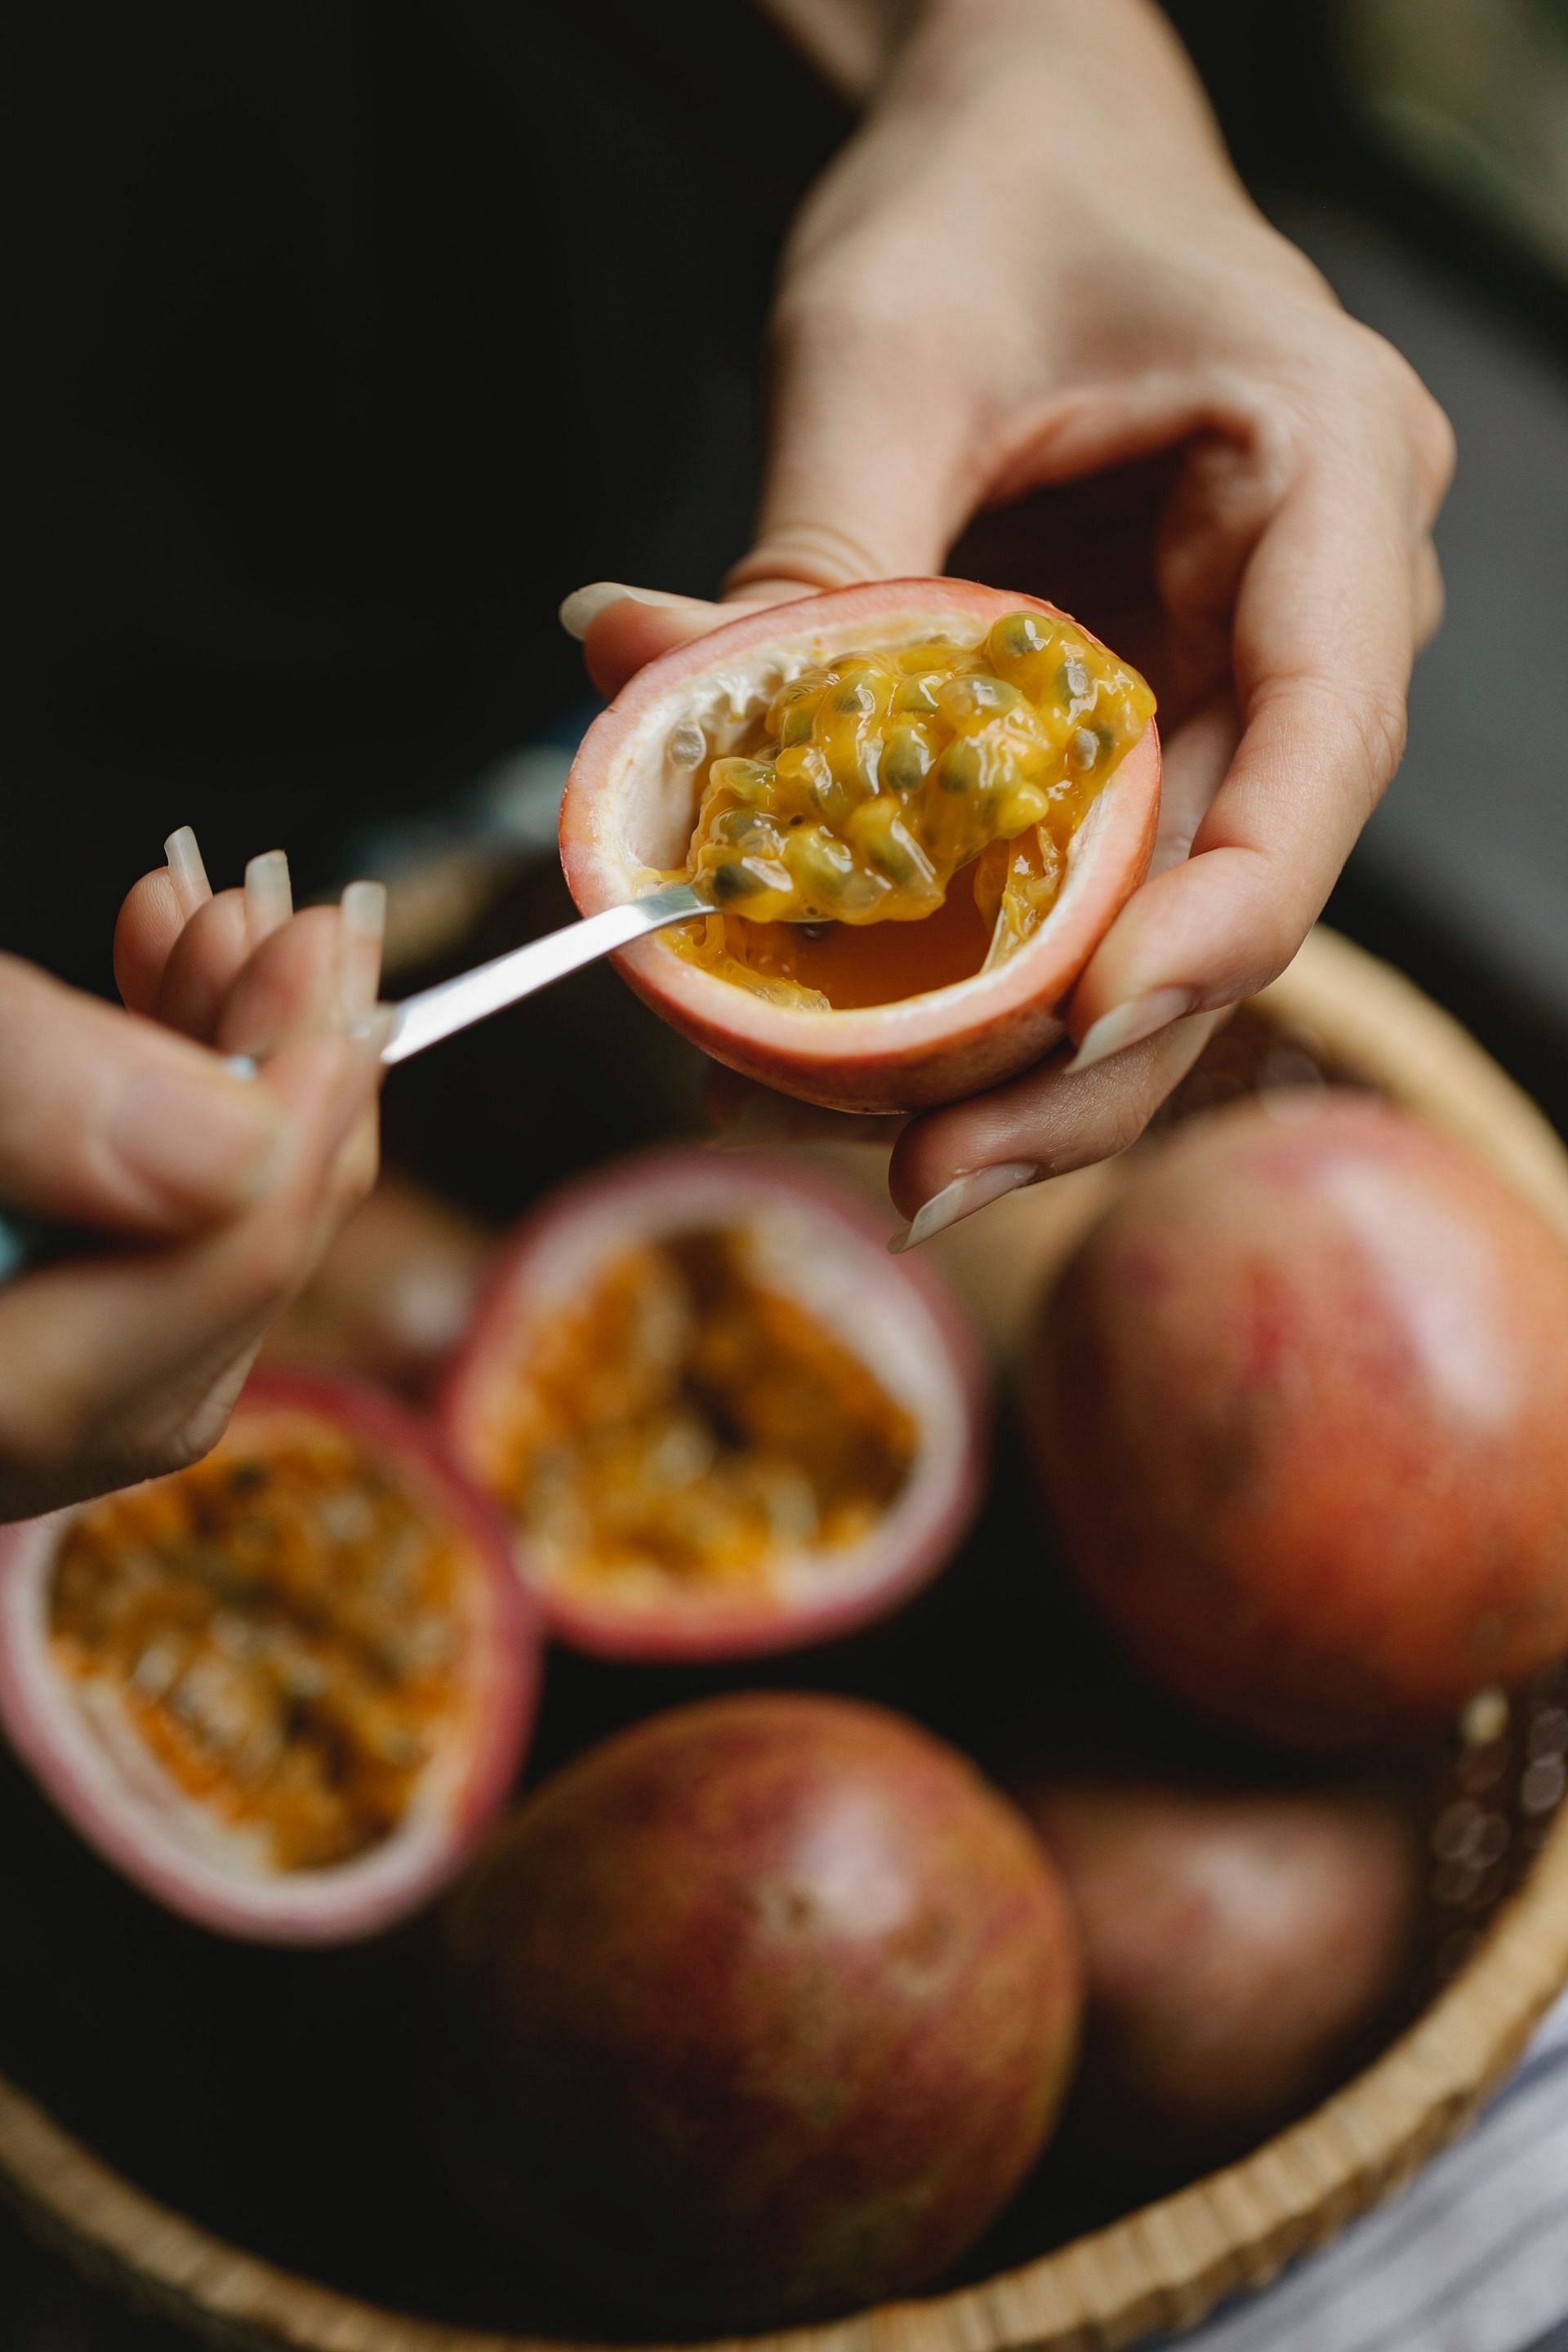 You can eat seeds of passion fruit (Image via Pexels/Any Lane)